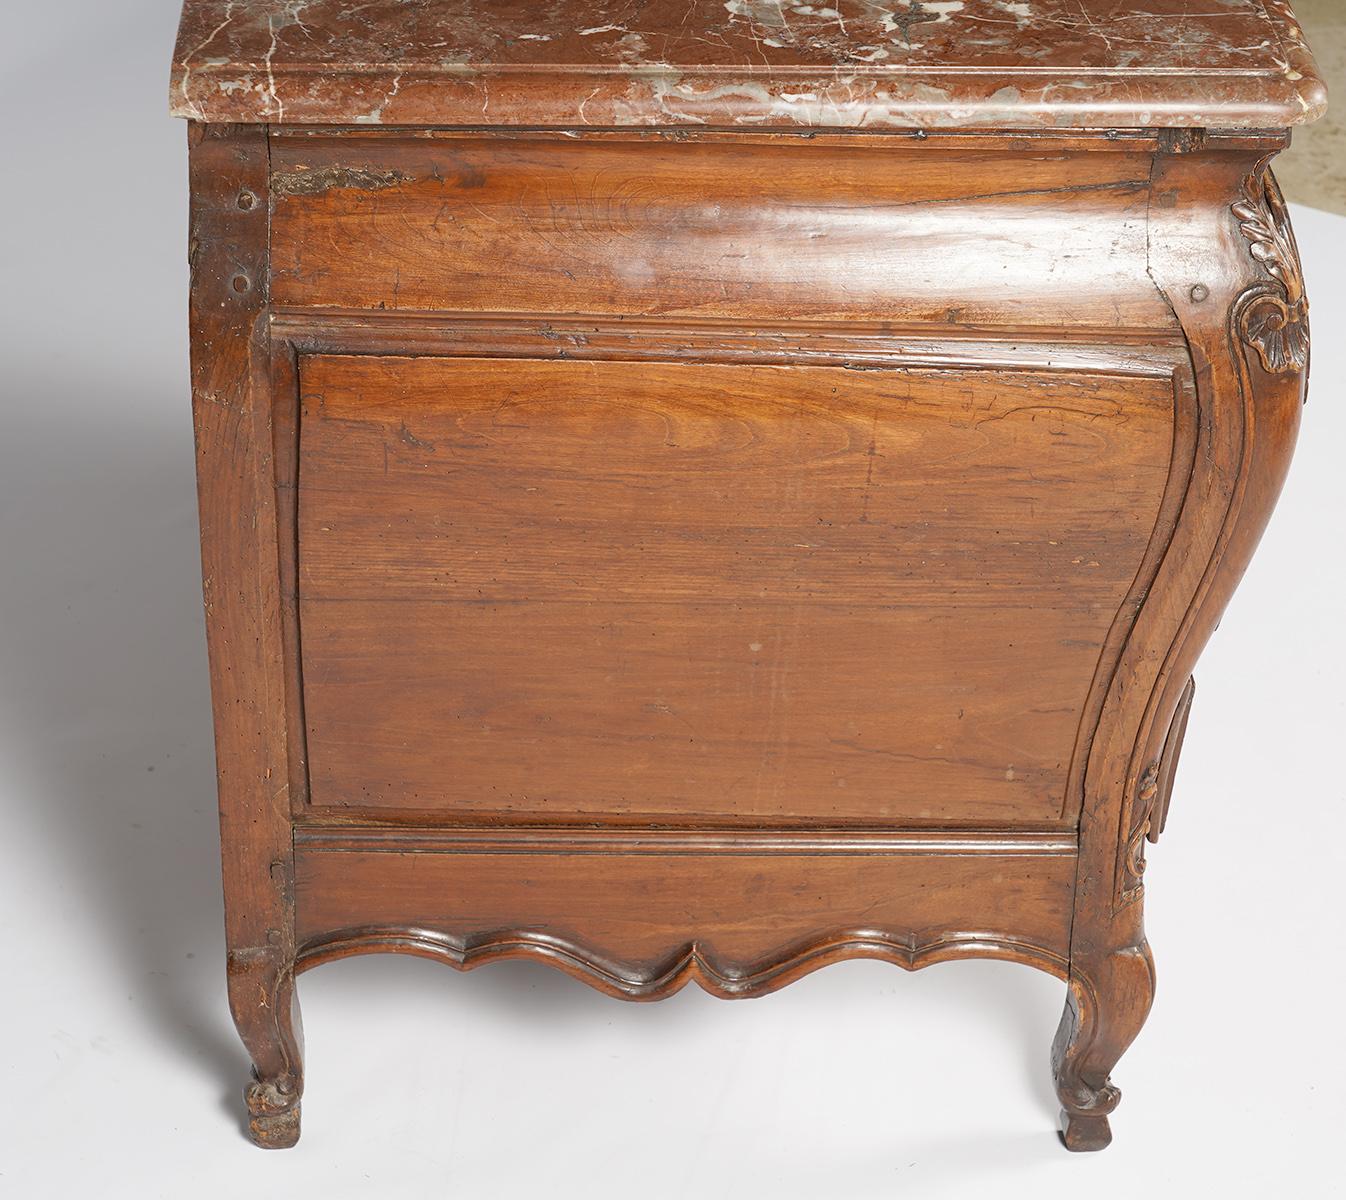 17th Century 18th Century French Provincial Fruitwood Marble-Top Bombe Commode